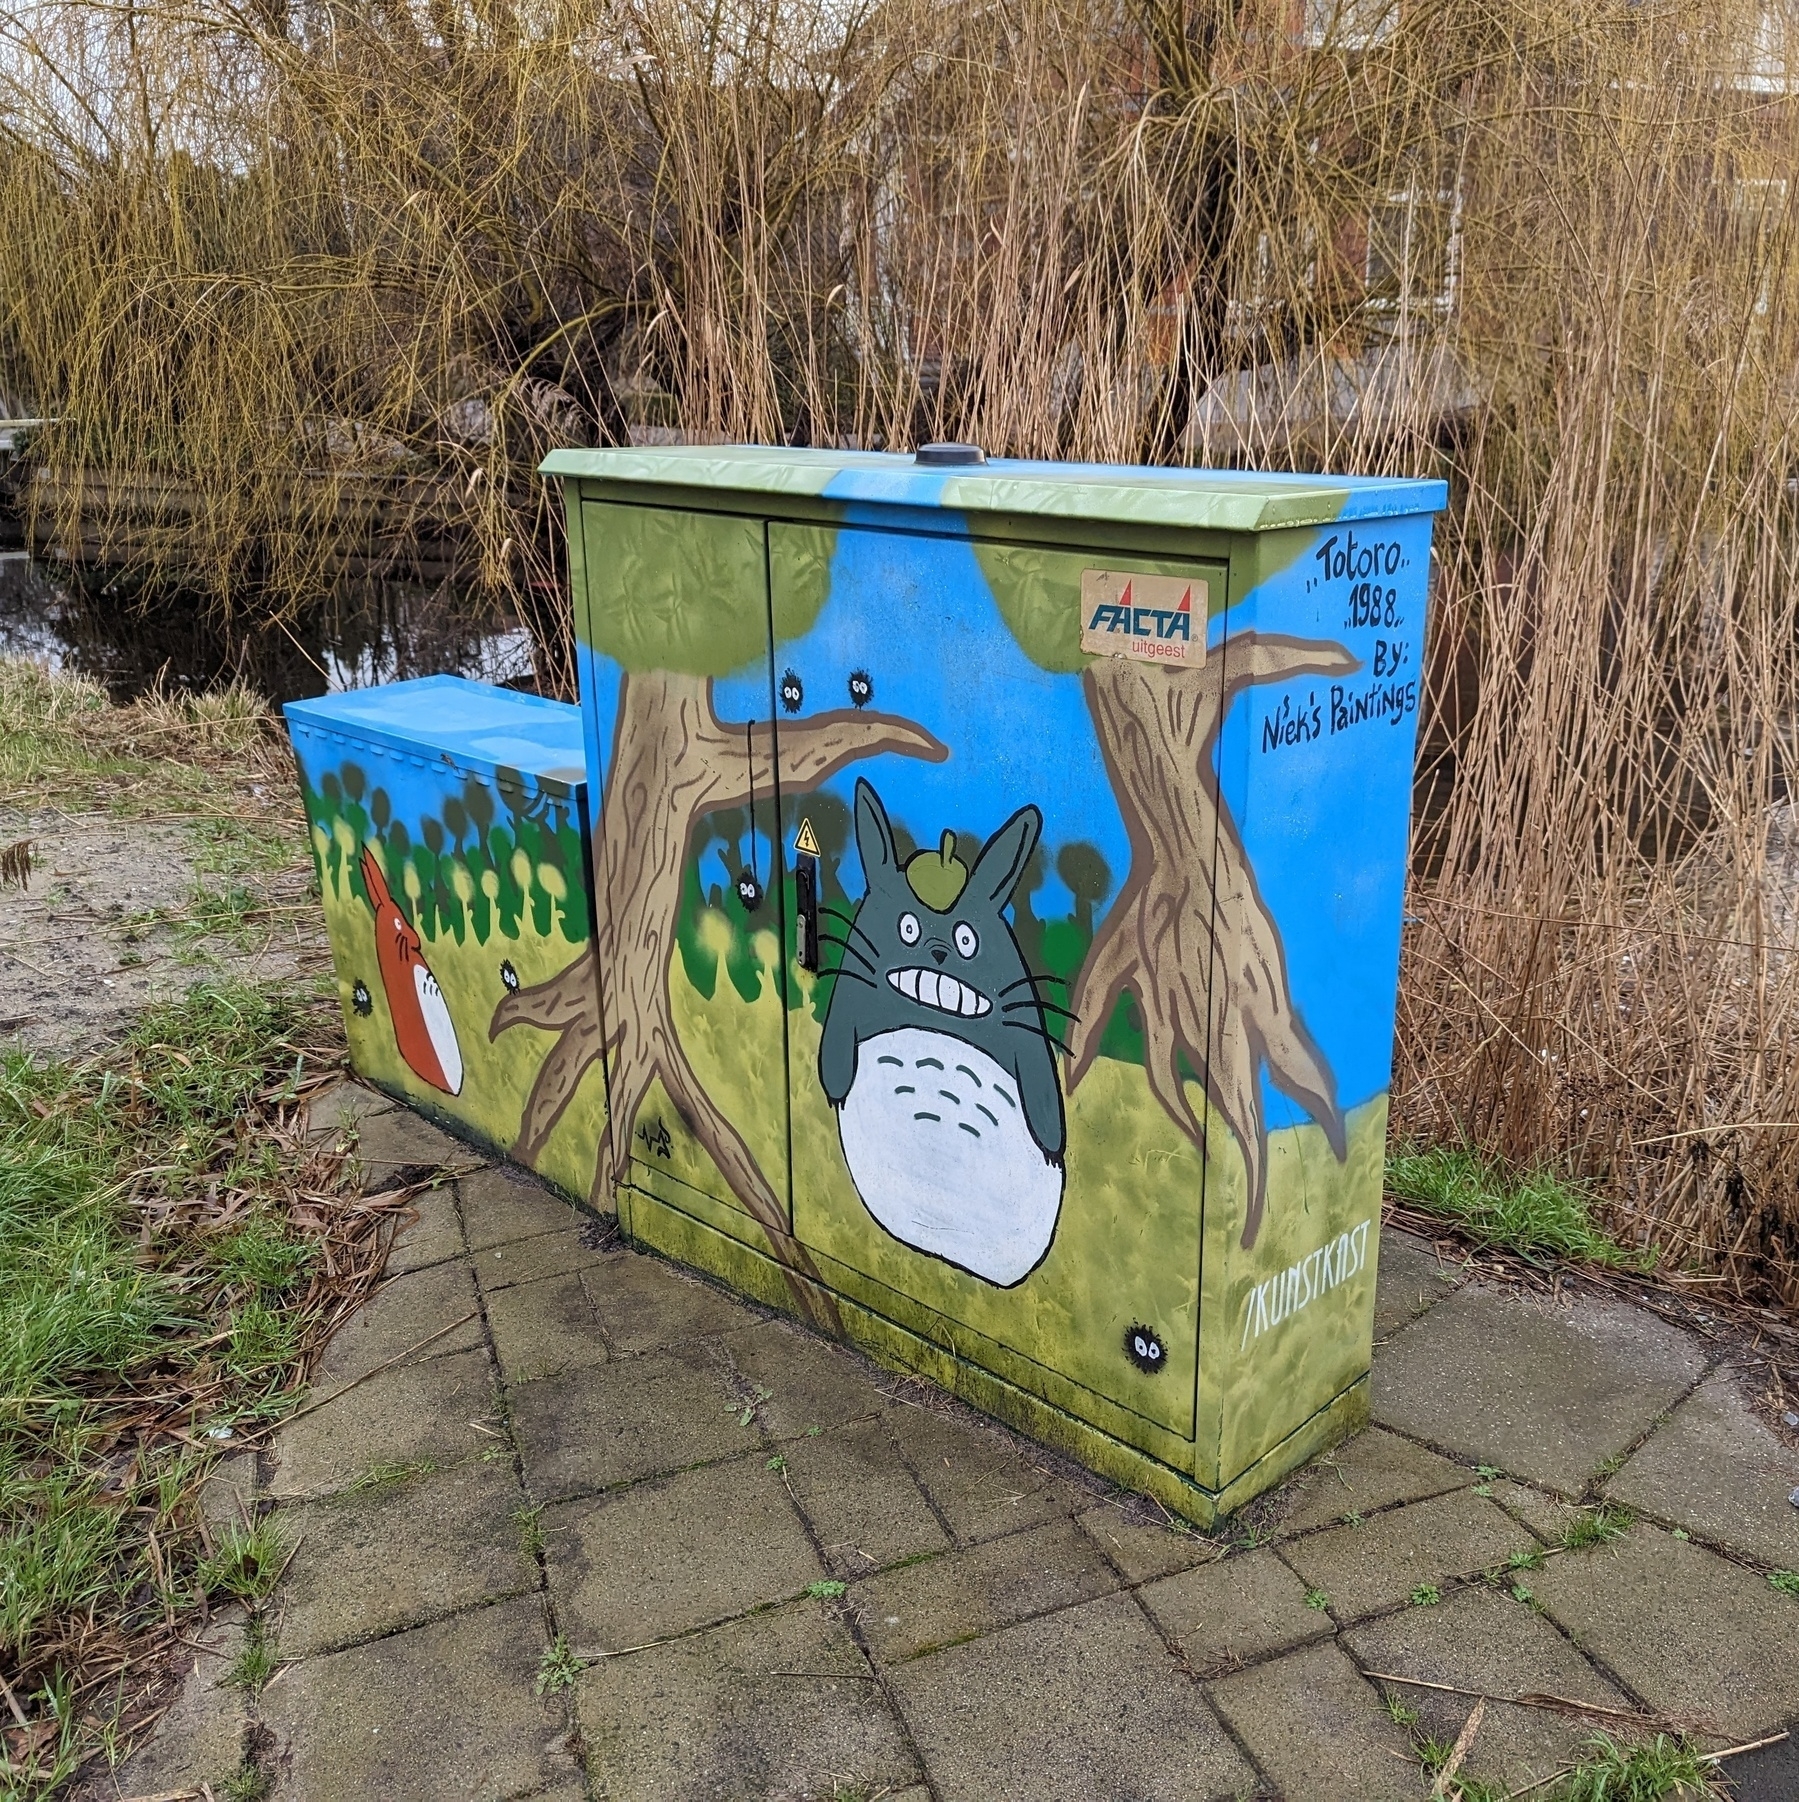 An electrical box painted with scenes from My Neighbor Totoro.